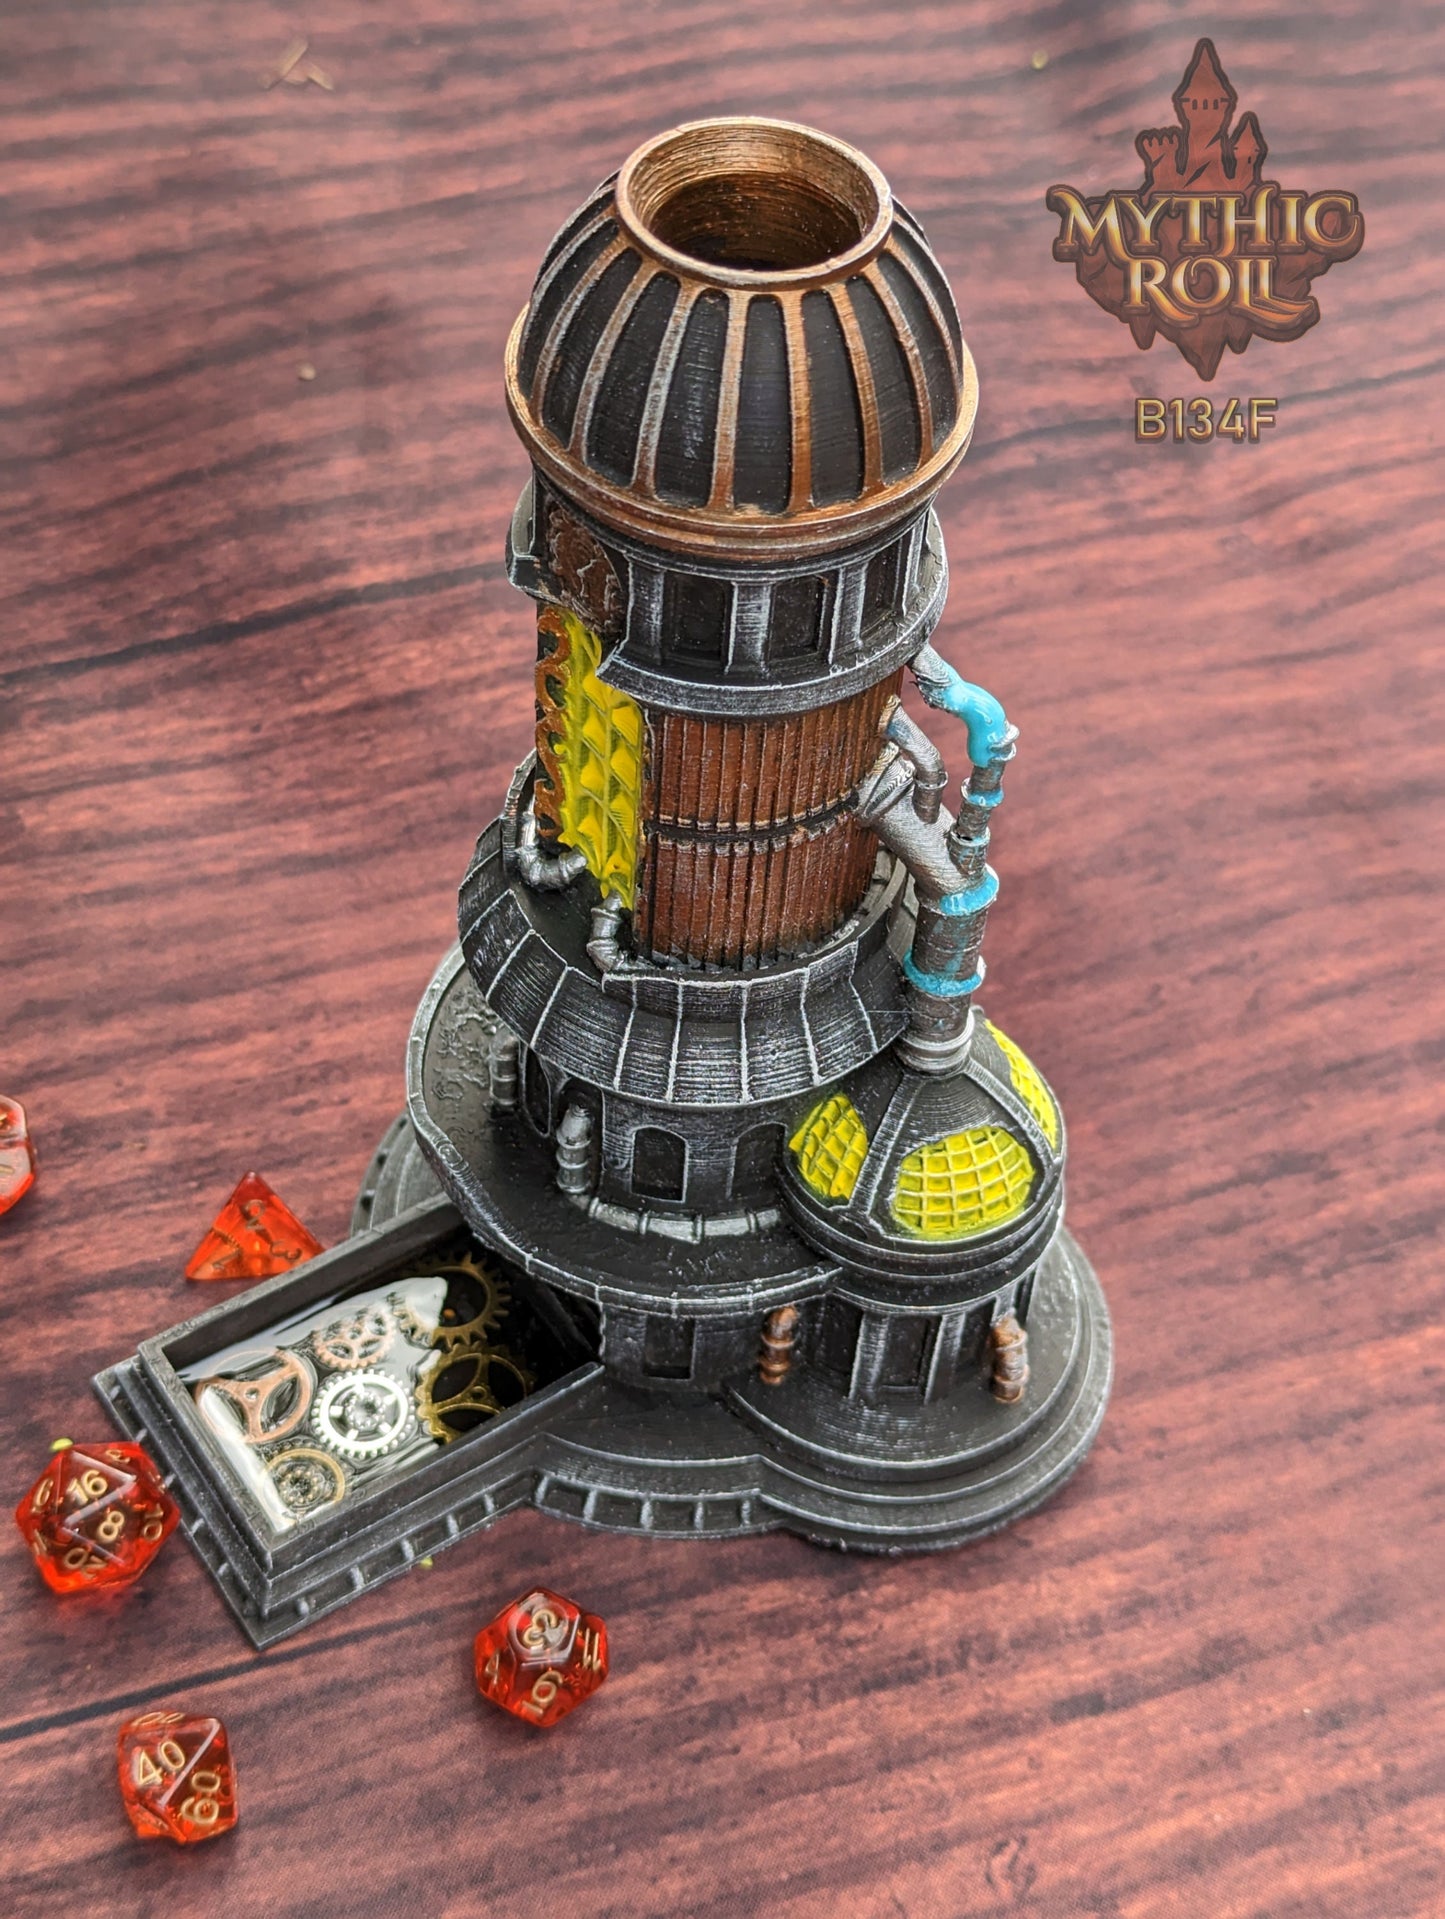 Steampunk 3D Printed Dice Tower- Mythic Roll Collection by Unchained Games - Tabletop RPG Gaming Cosplay - Roll with Clock Work Precision!